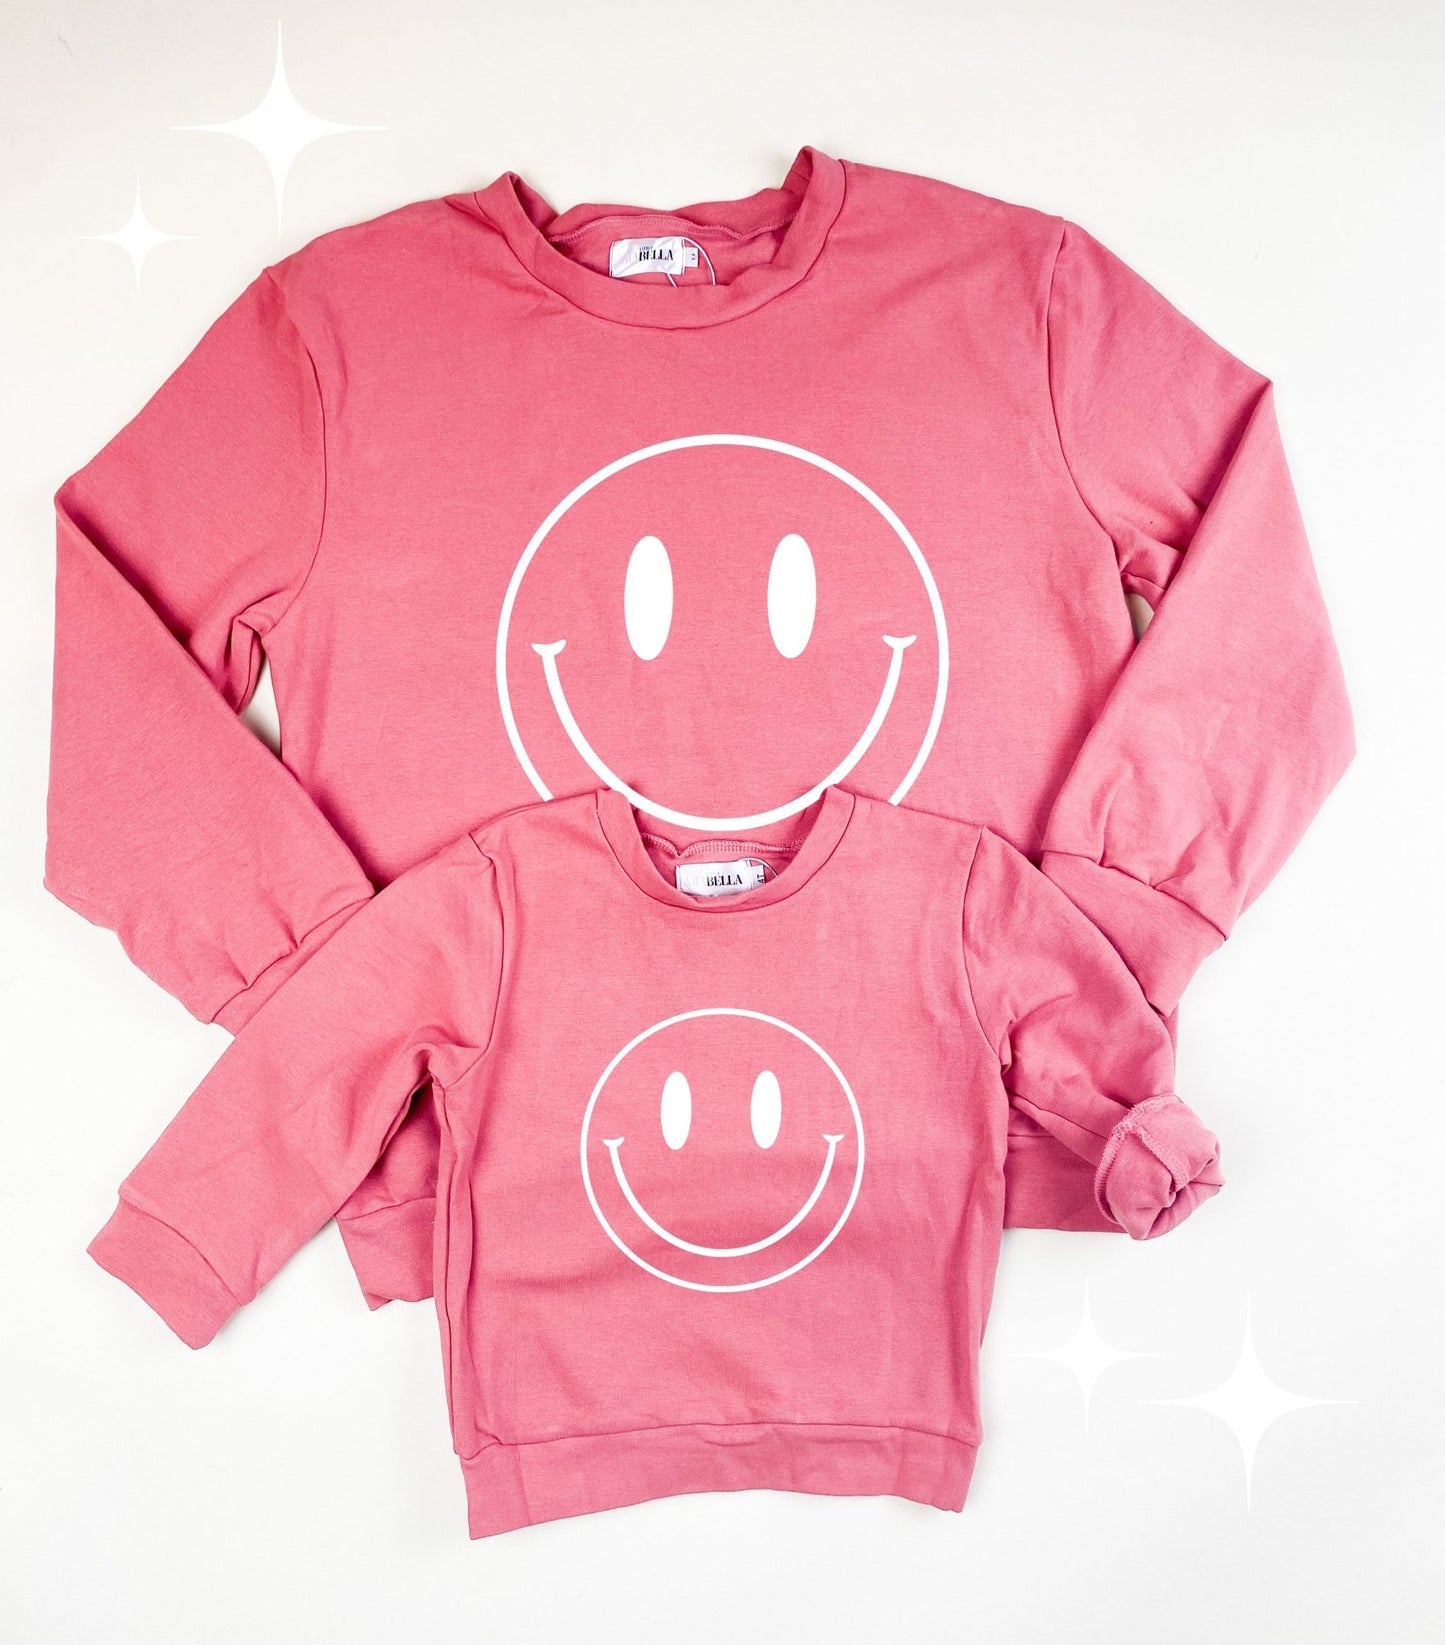 Mauve Smiley Mommy and me Matching Crewneck Sweaters - LITTLE MIA BELLA